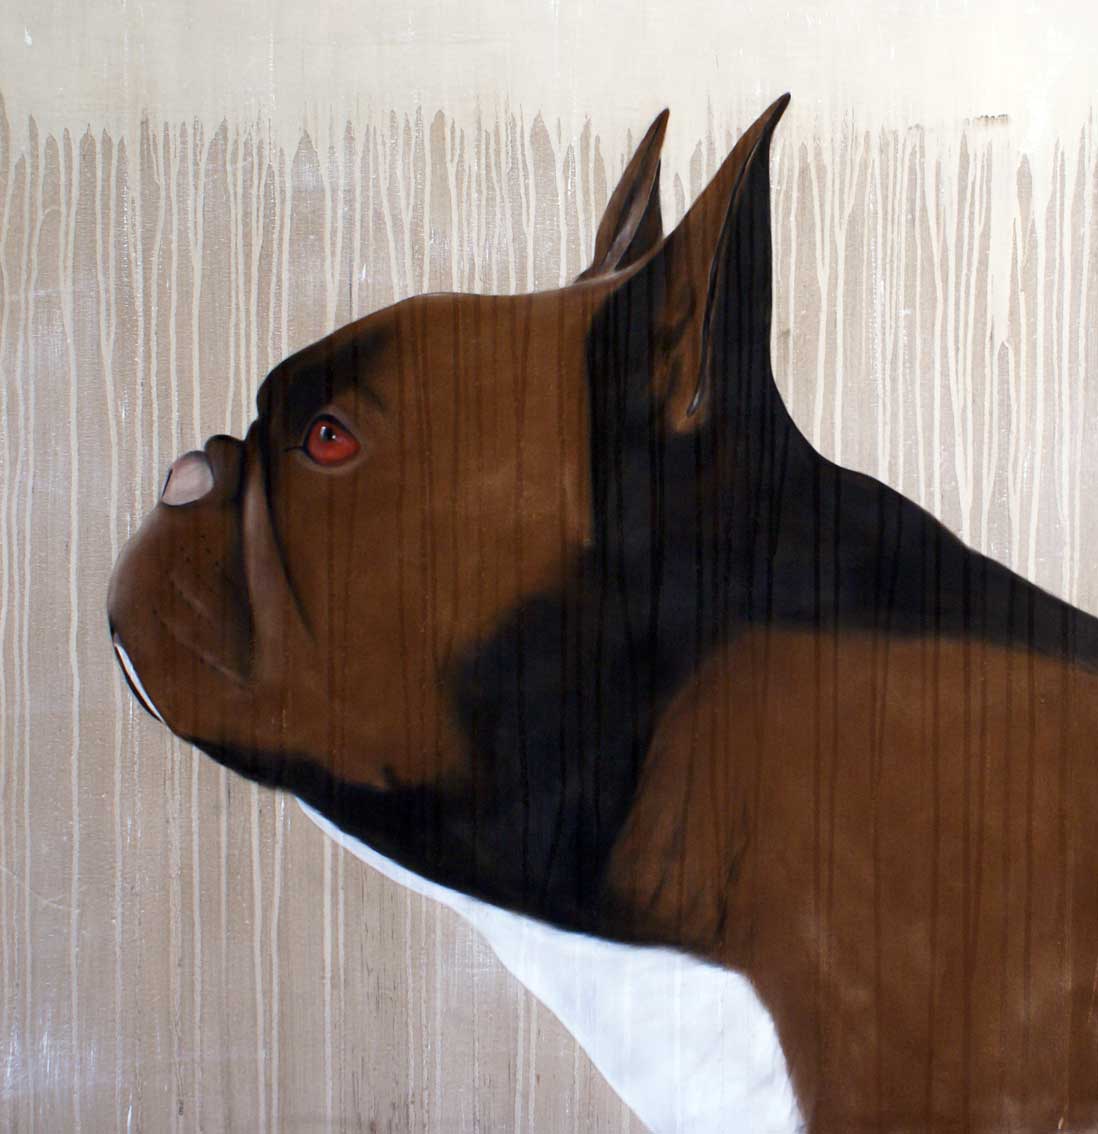 Bouledogue-francais-01 bulldog-french-bulldog-frenchie-pet Thierry Bisch Contemporary painter animals painting art  nature biodiversity conservation 